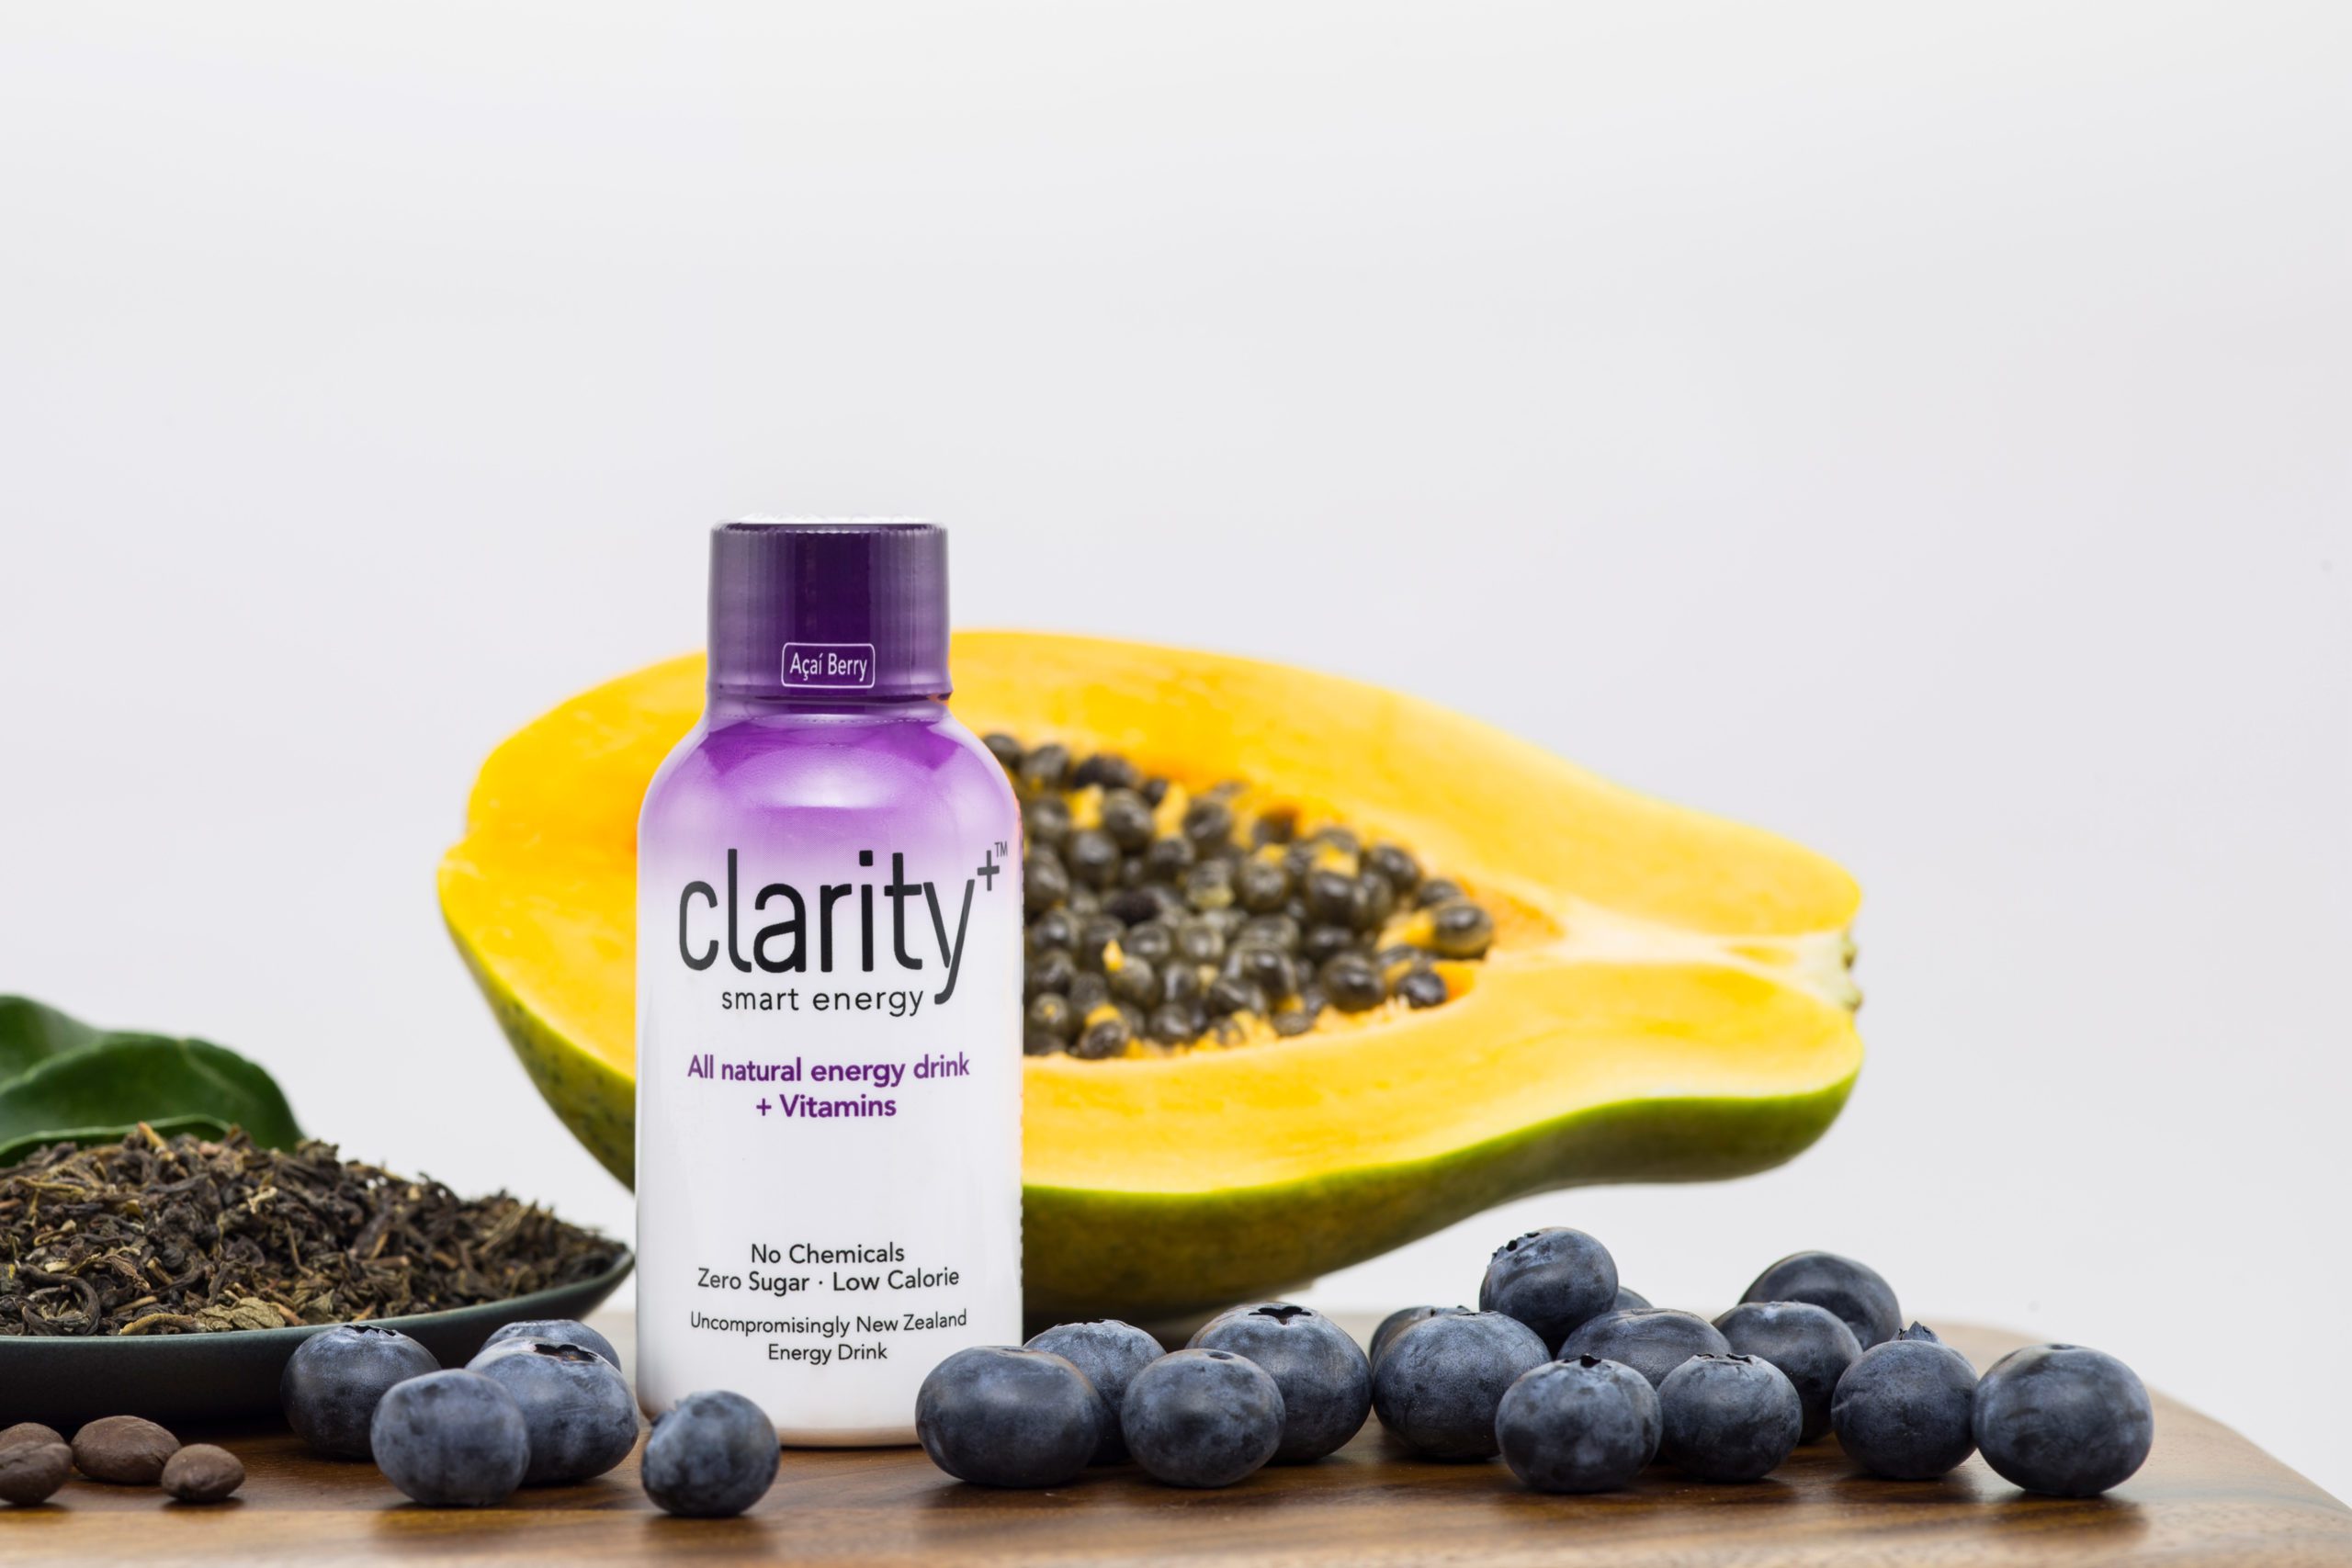 Clarity product photo with papaya and bluberry